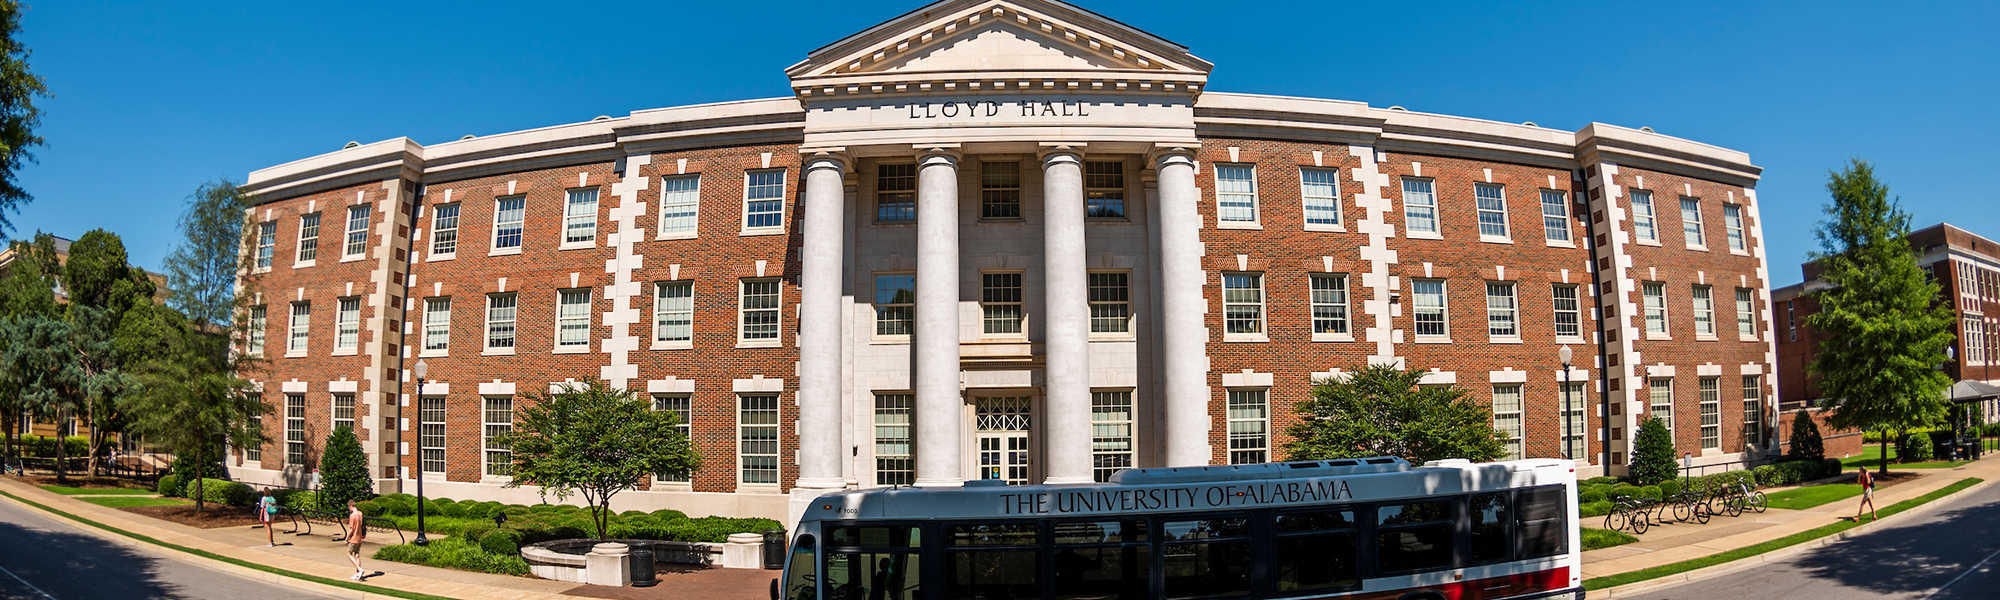 front of Lloyd Hall, where the Writing Center is located